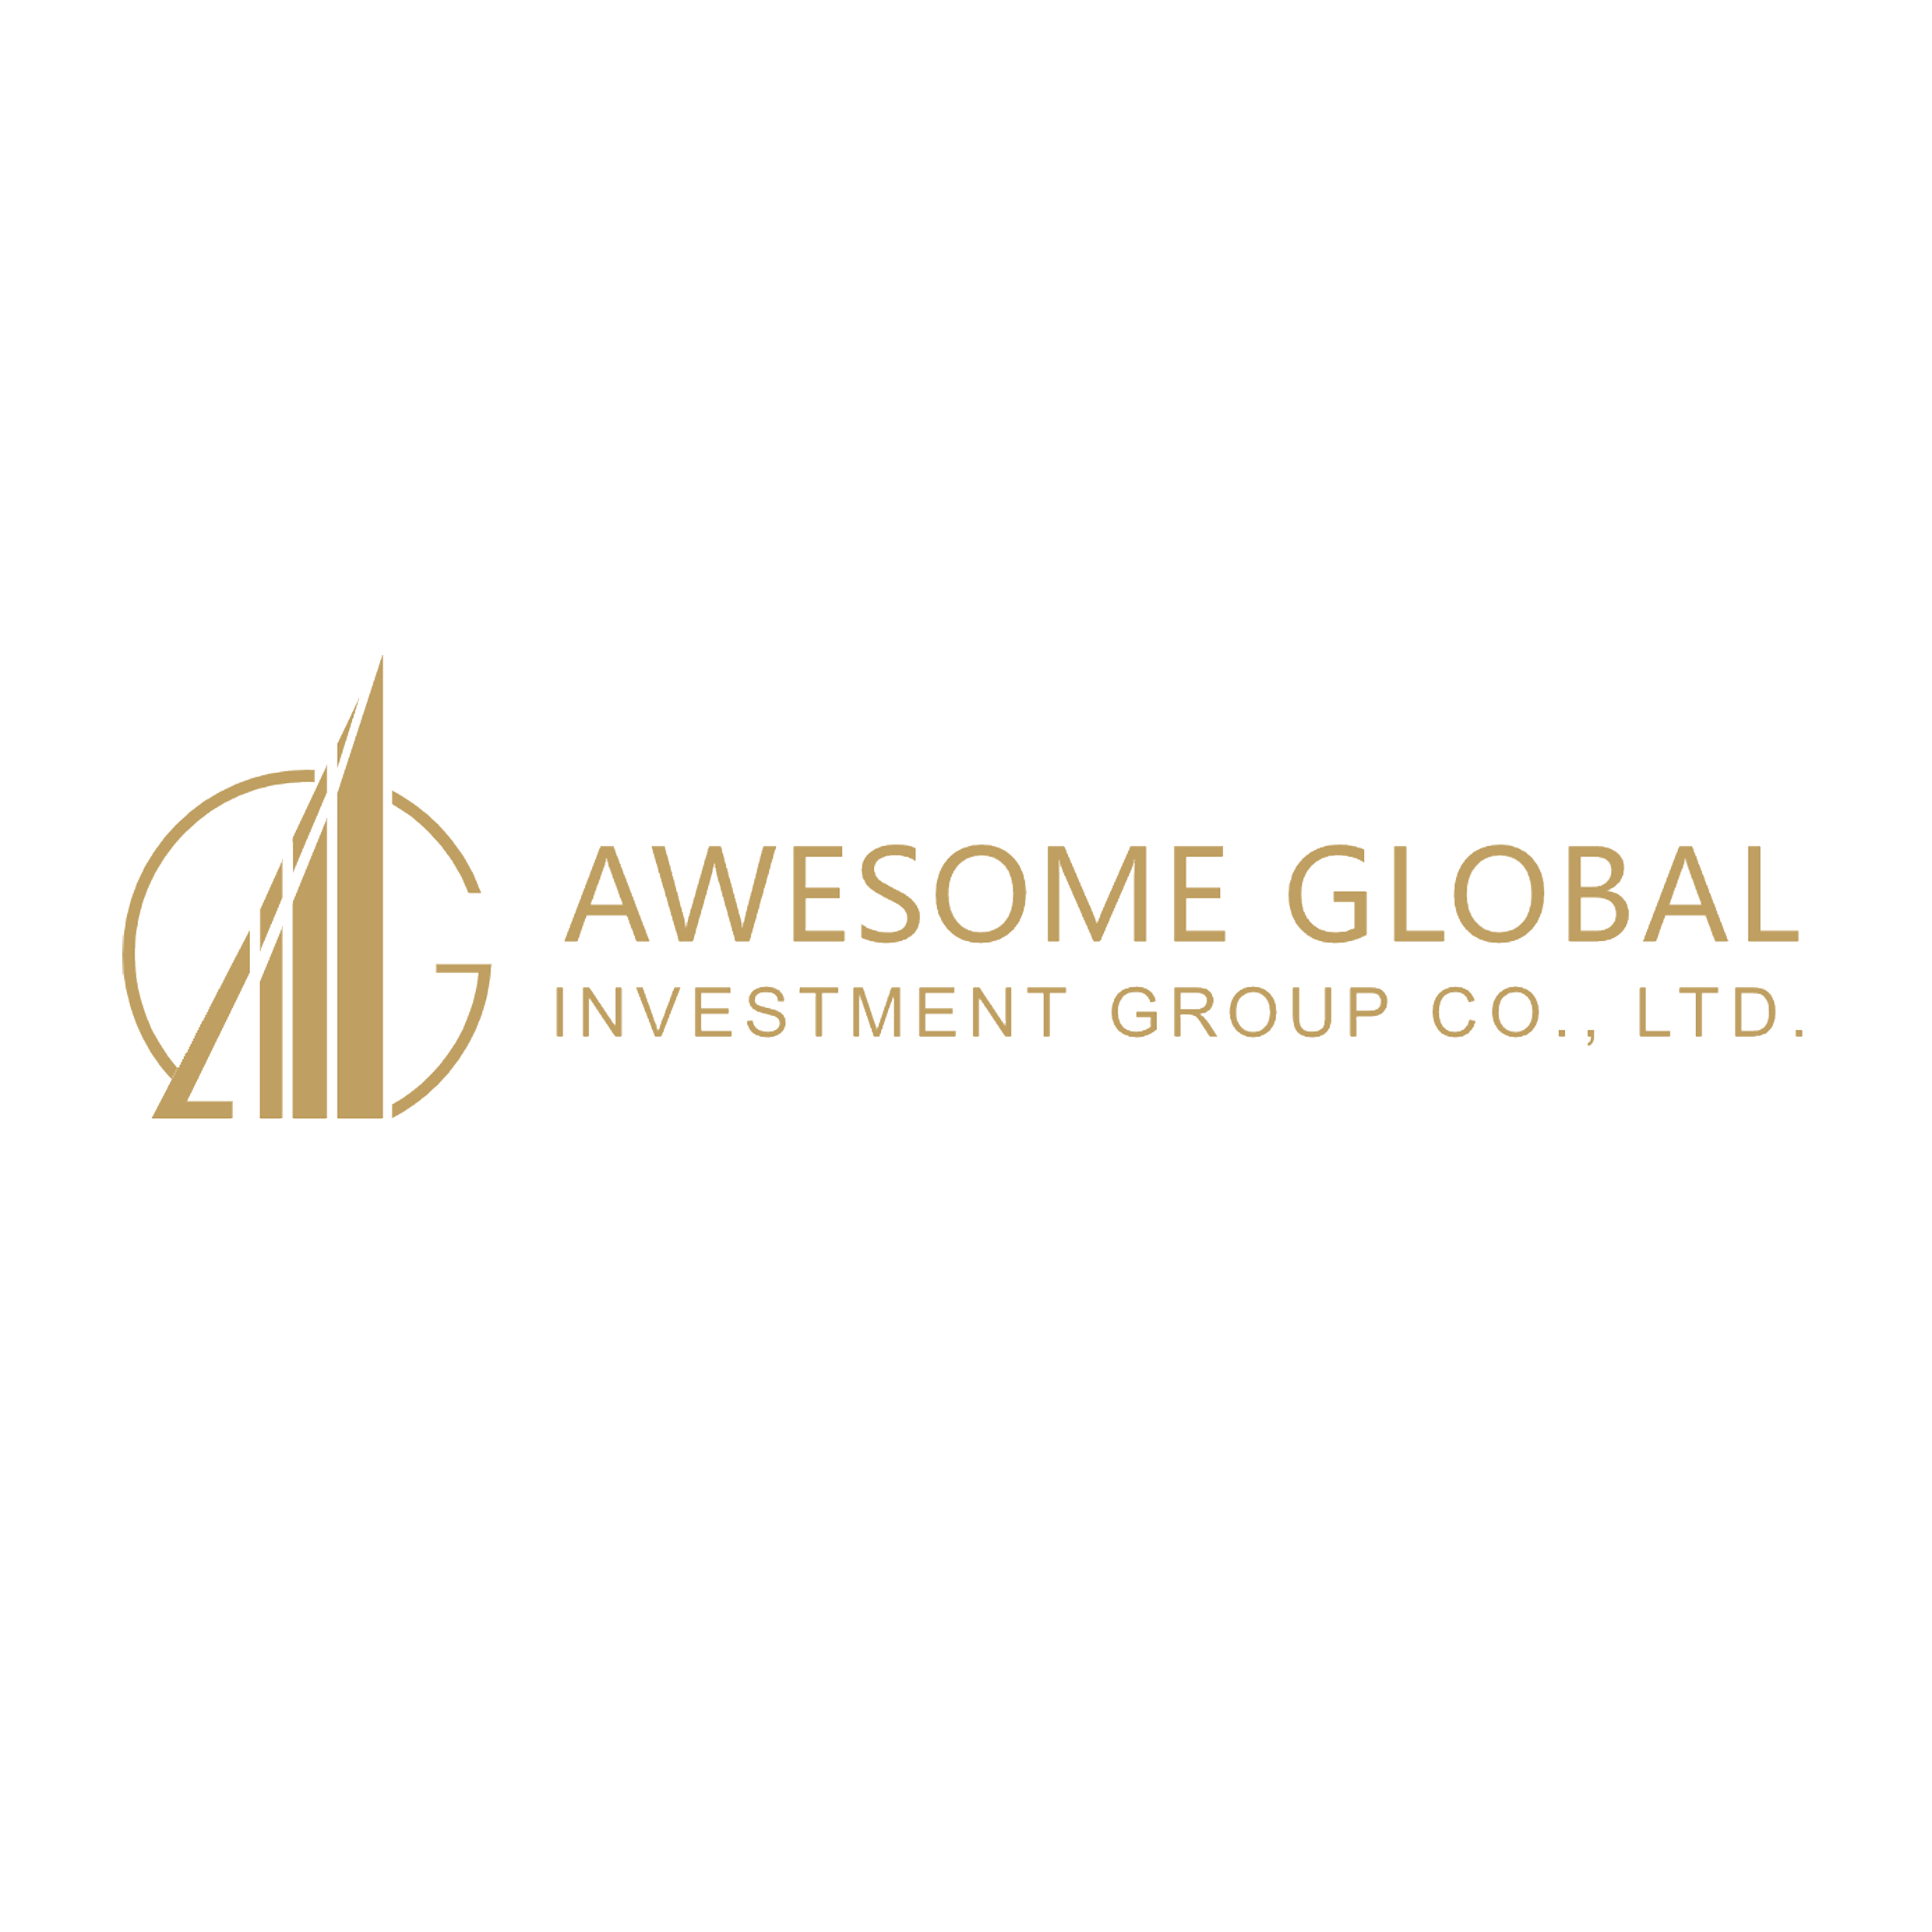 Awesome Global Investment Group